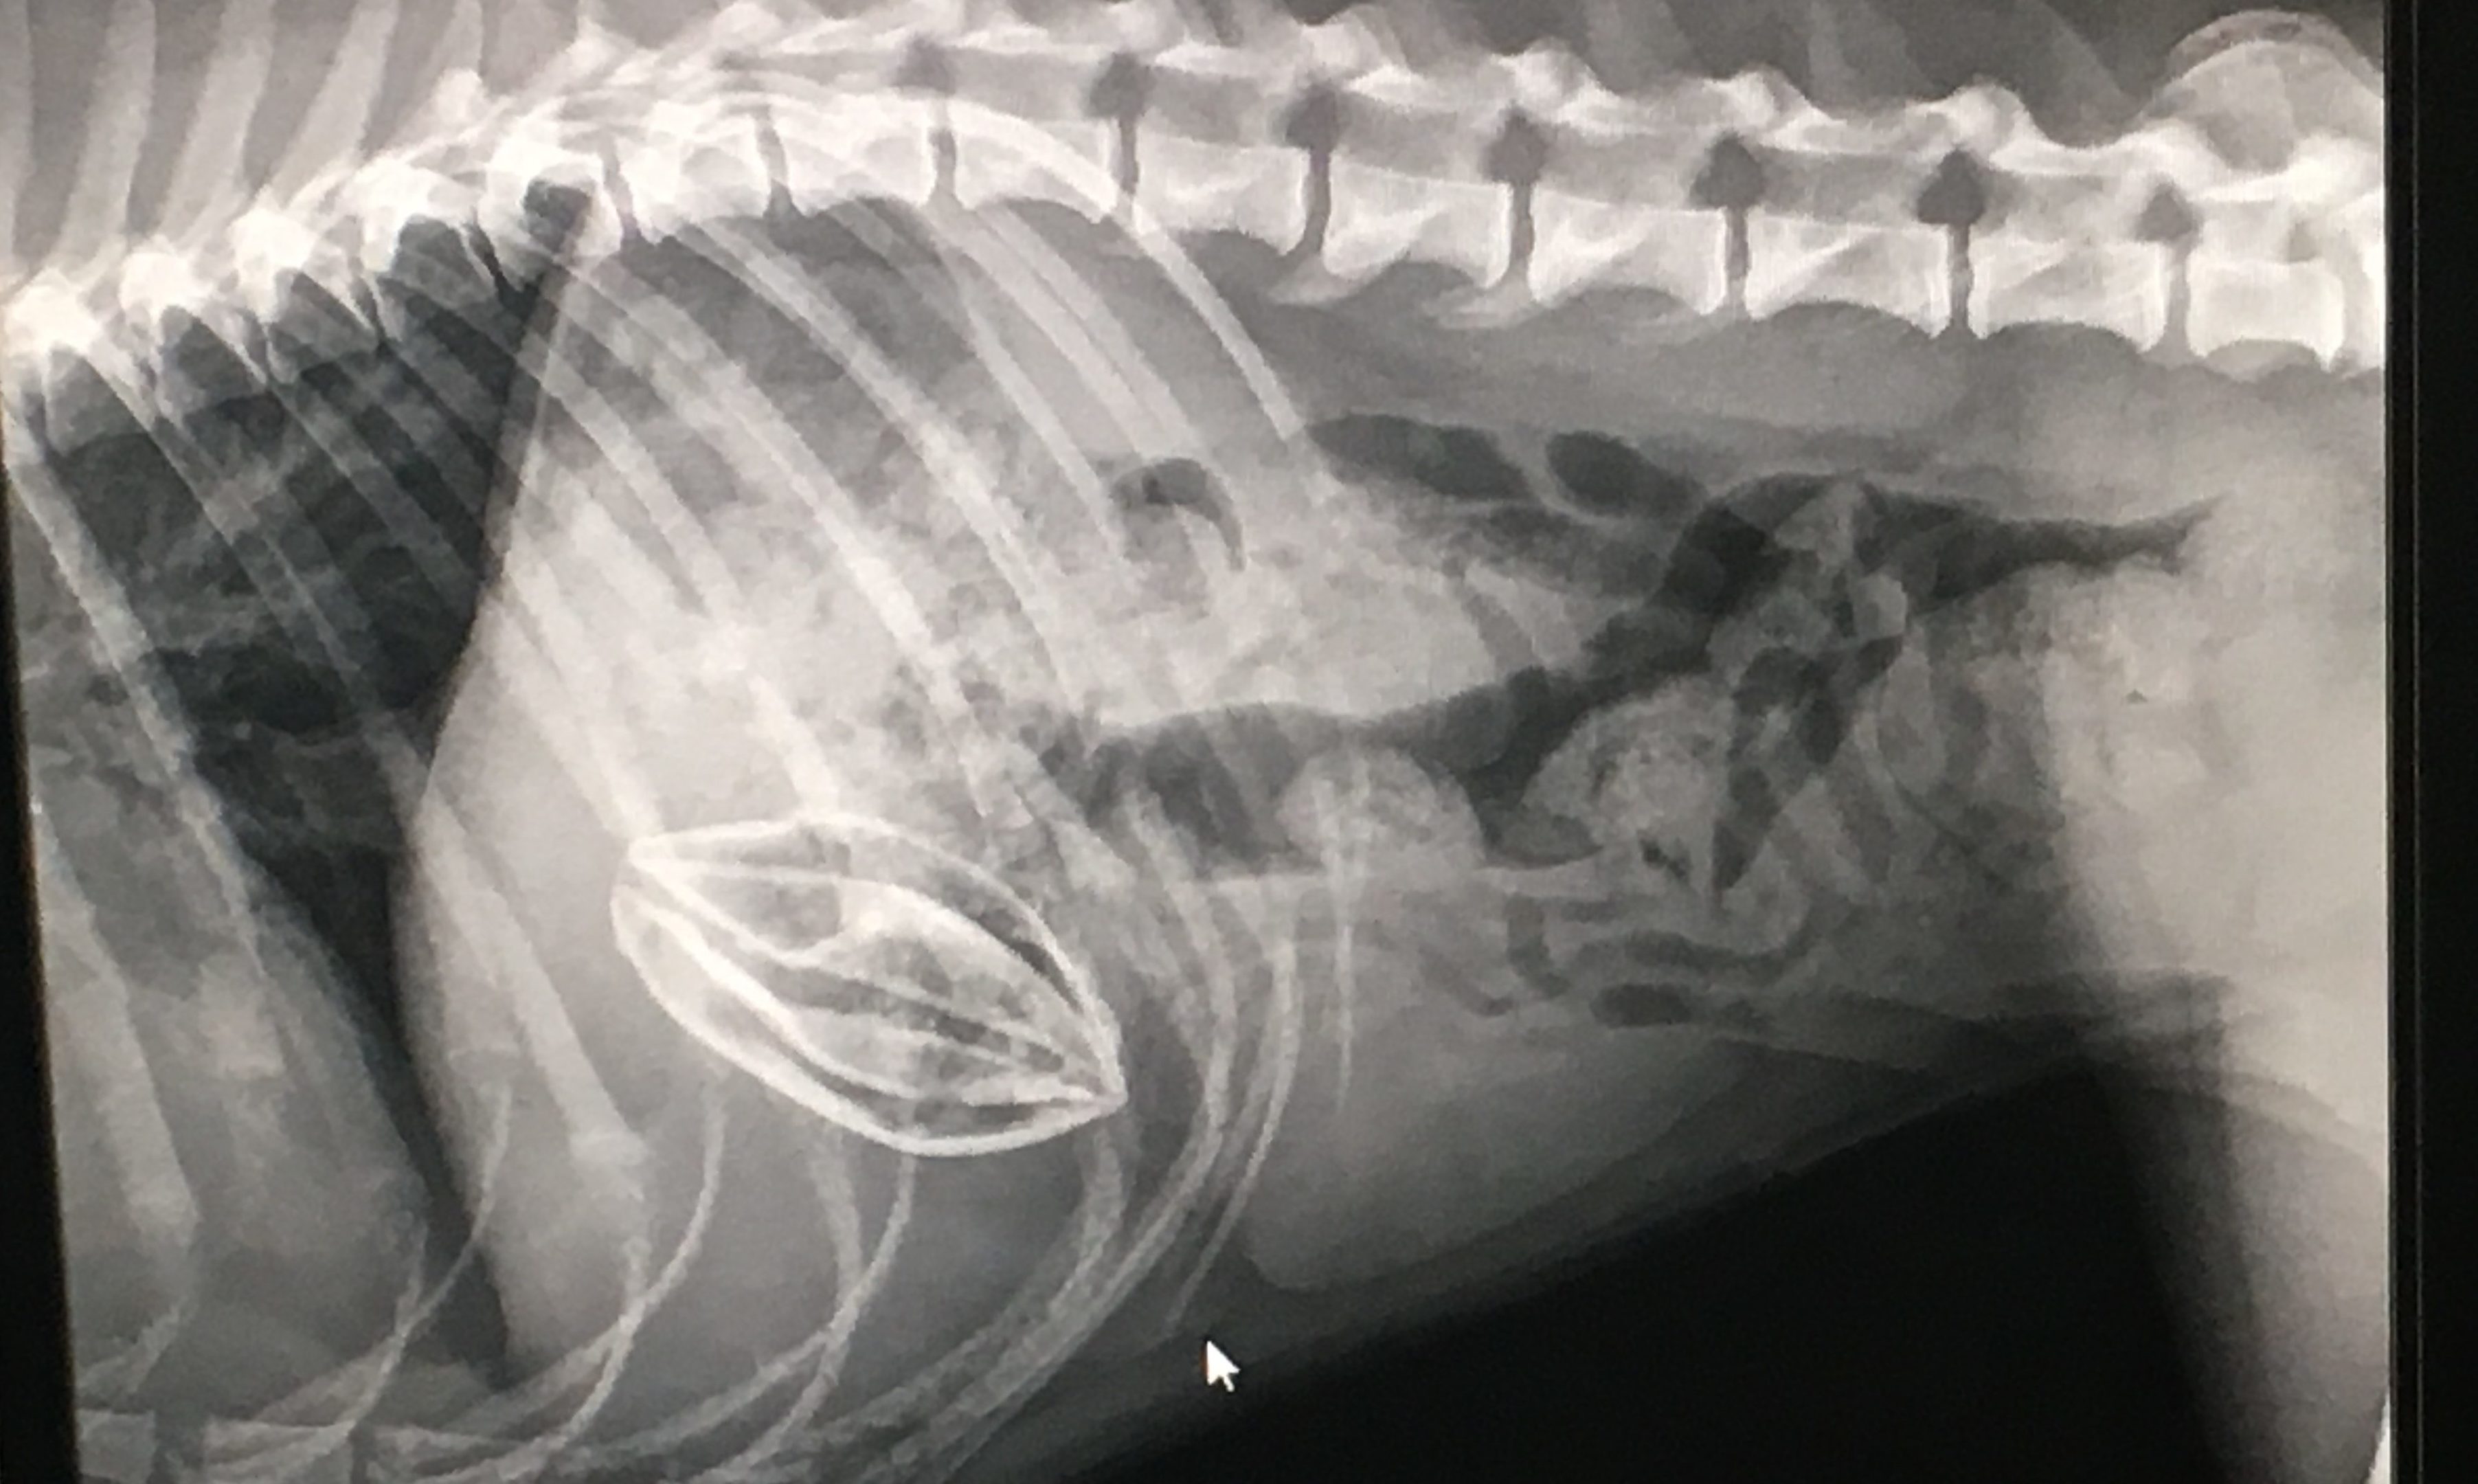 The ball showed up on the x-ray